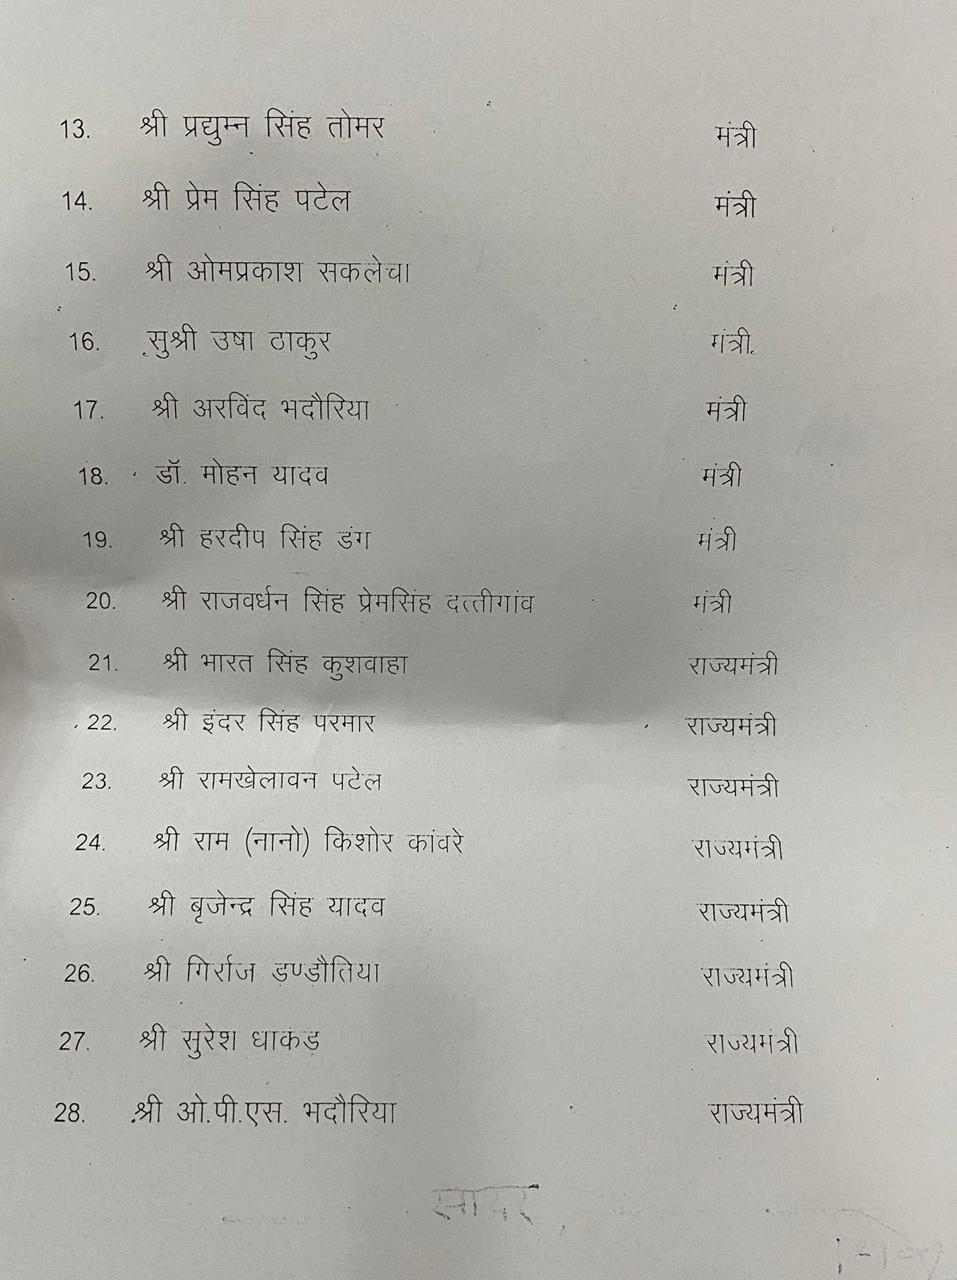 List of Ministers inducted in the MP cabinet